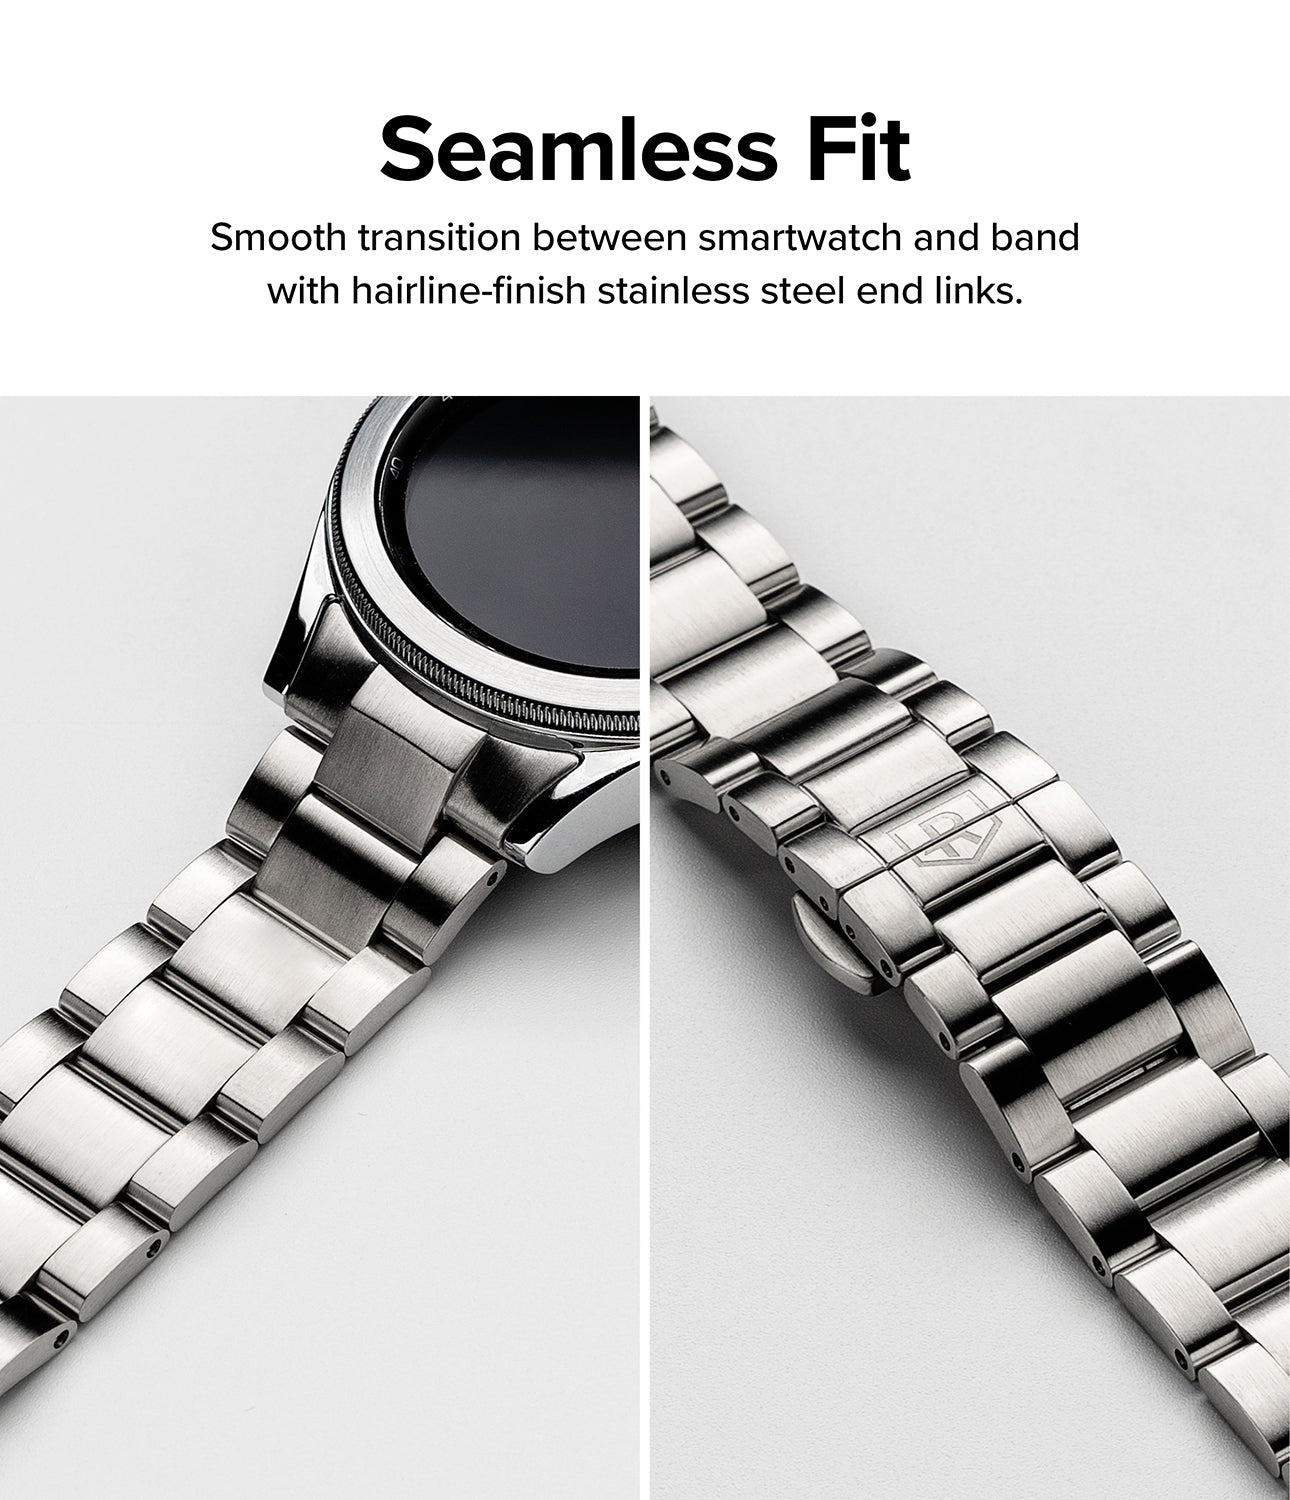 Stainless Steel Strap For Samsung Galaxy Watch 4 Classic 46mm 42mm